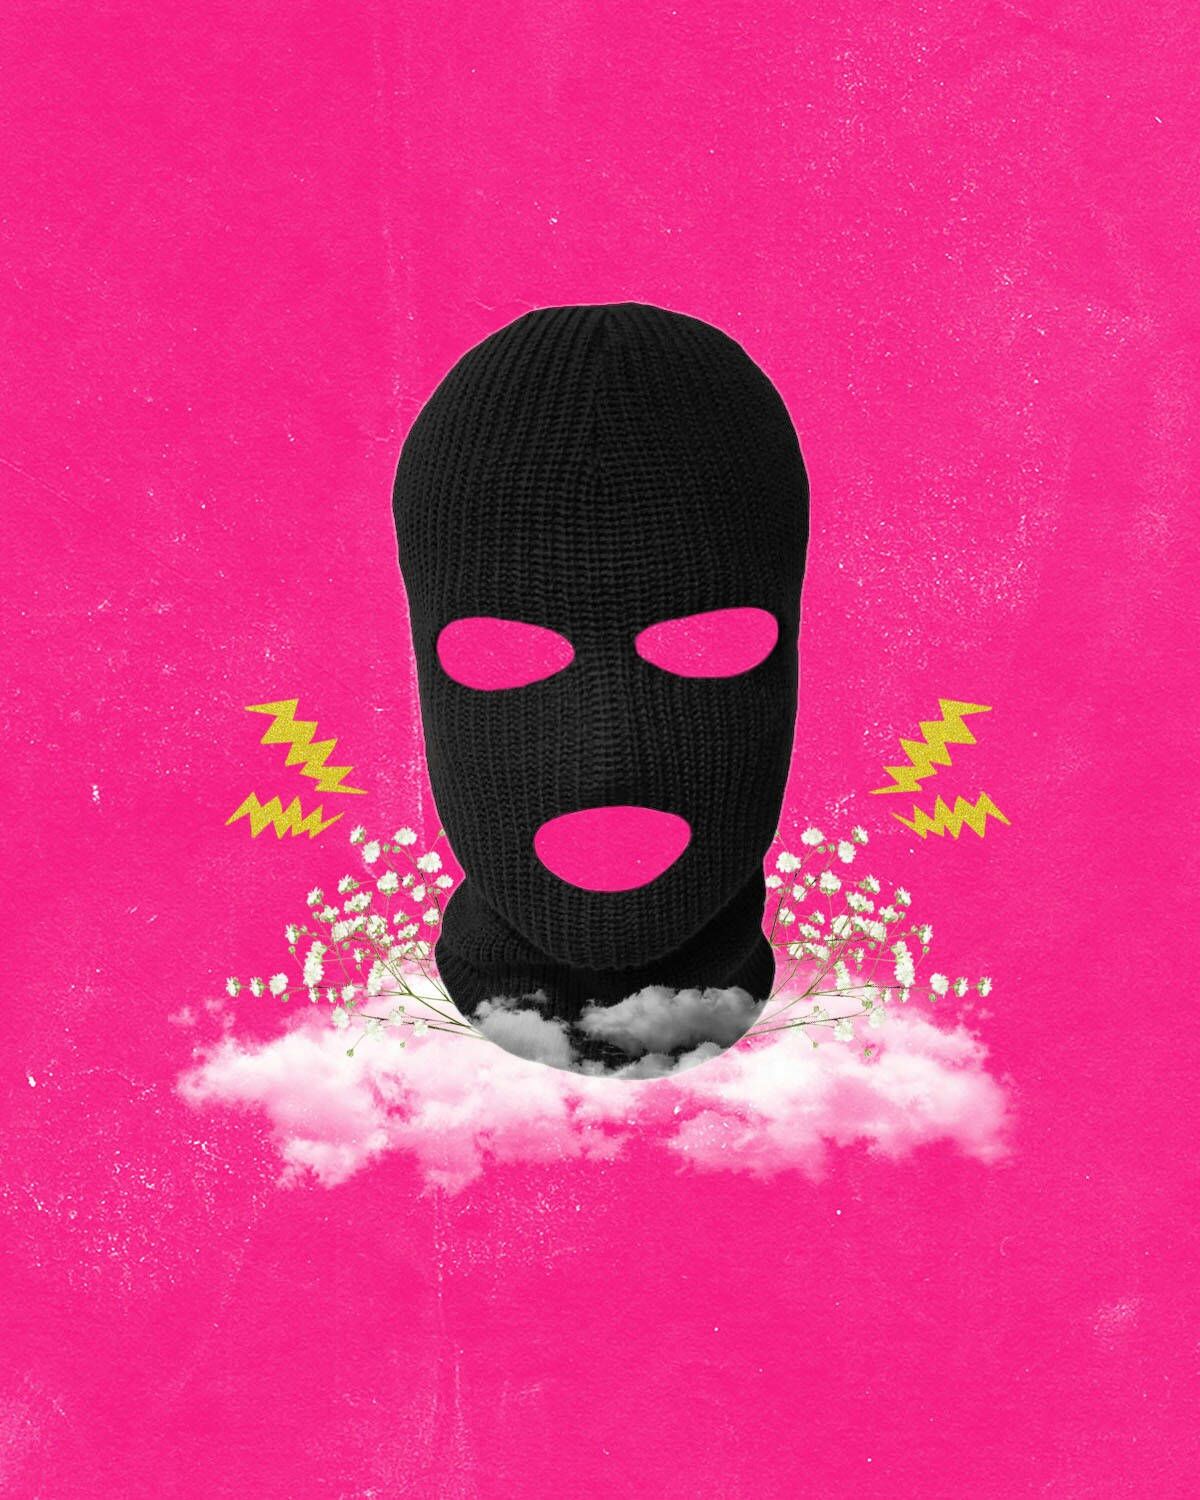 A balaclava mask with pink lips and eyes sits on a cloud of white flowers on a pink background. - Ski